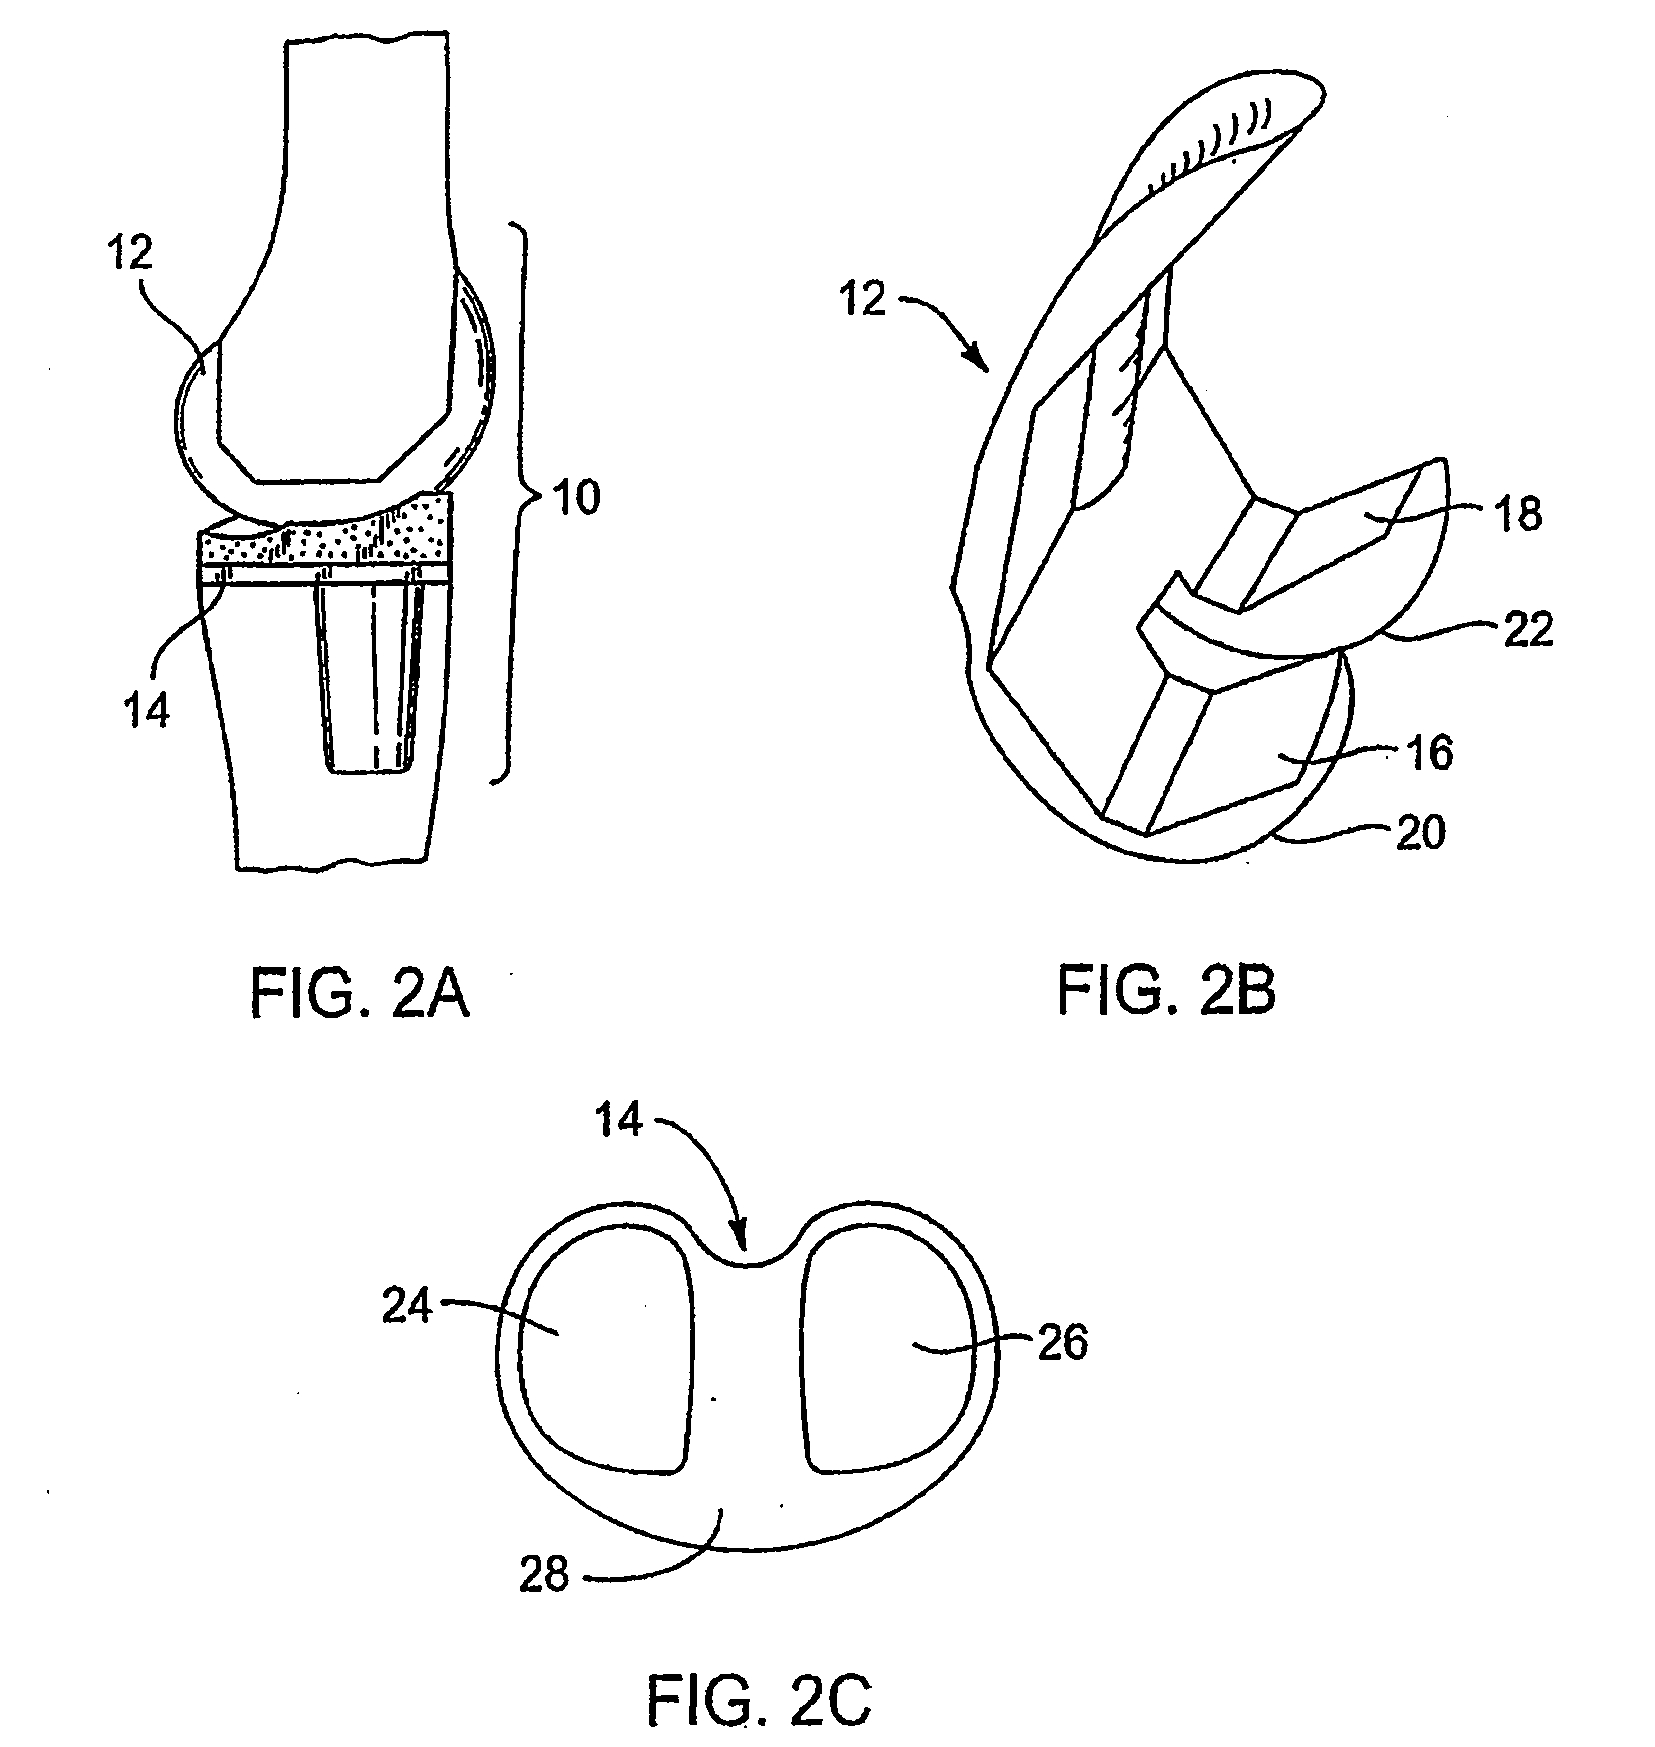 Systems and methods for providing deeper knee flexion capabilities for knee prosthesis patients